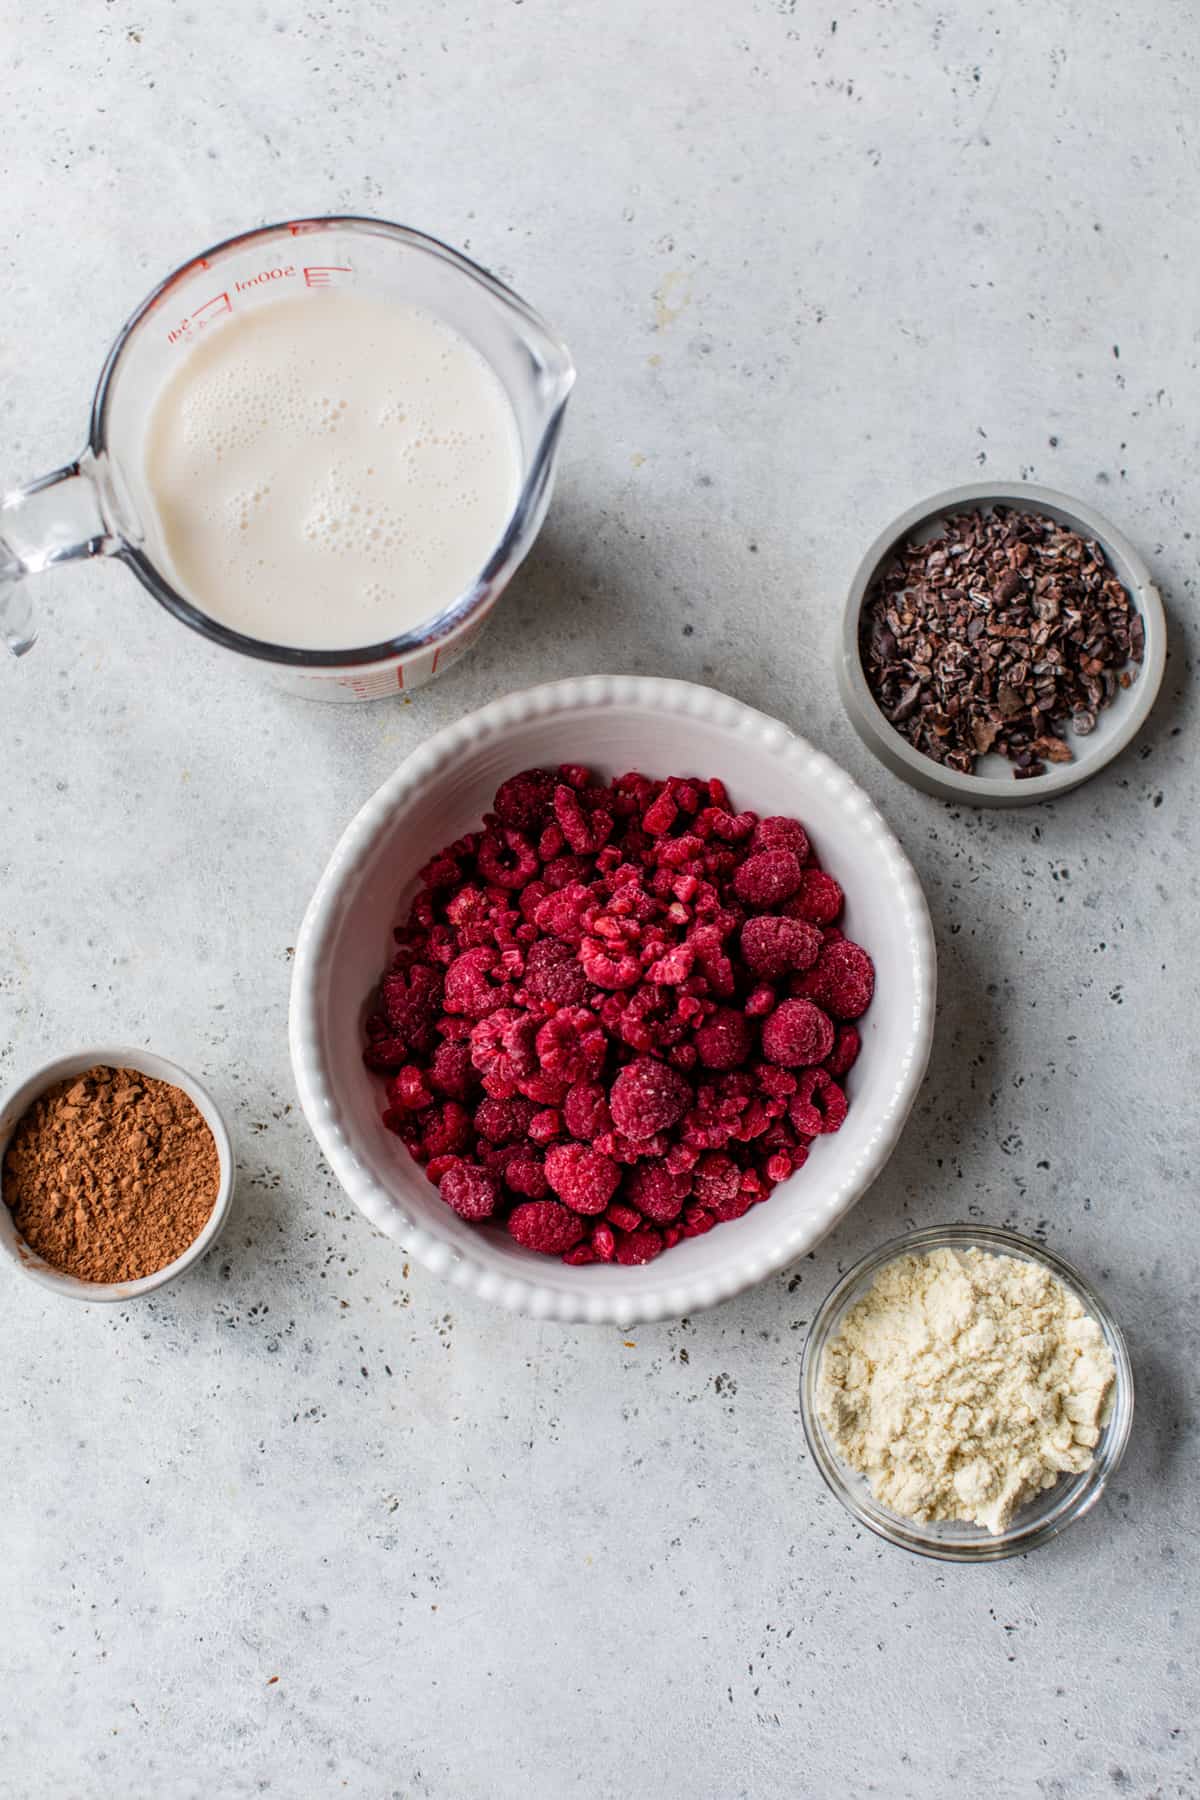 raspberries, protein powder, almond milk, cacao powder and cacao nibs measured int small bowls